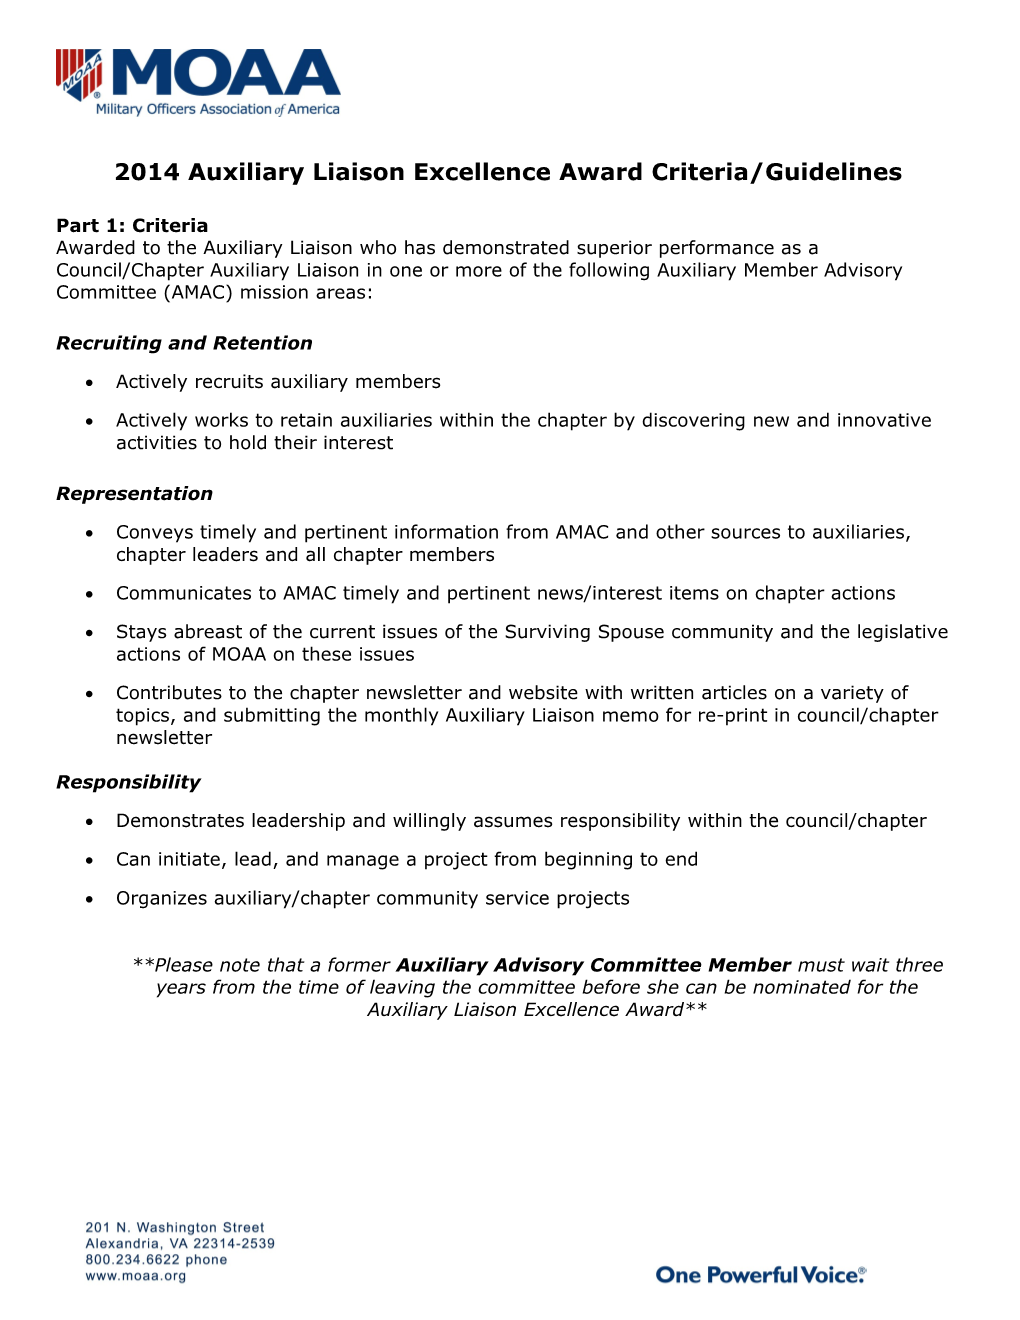 2011 Auxiliary Liaison Excellence Award Criteria/Guidelines and Nomination Form ()